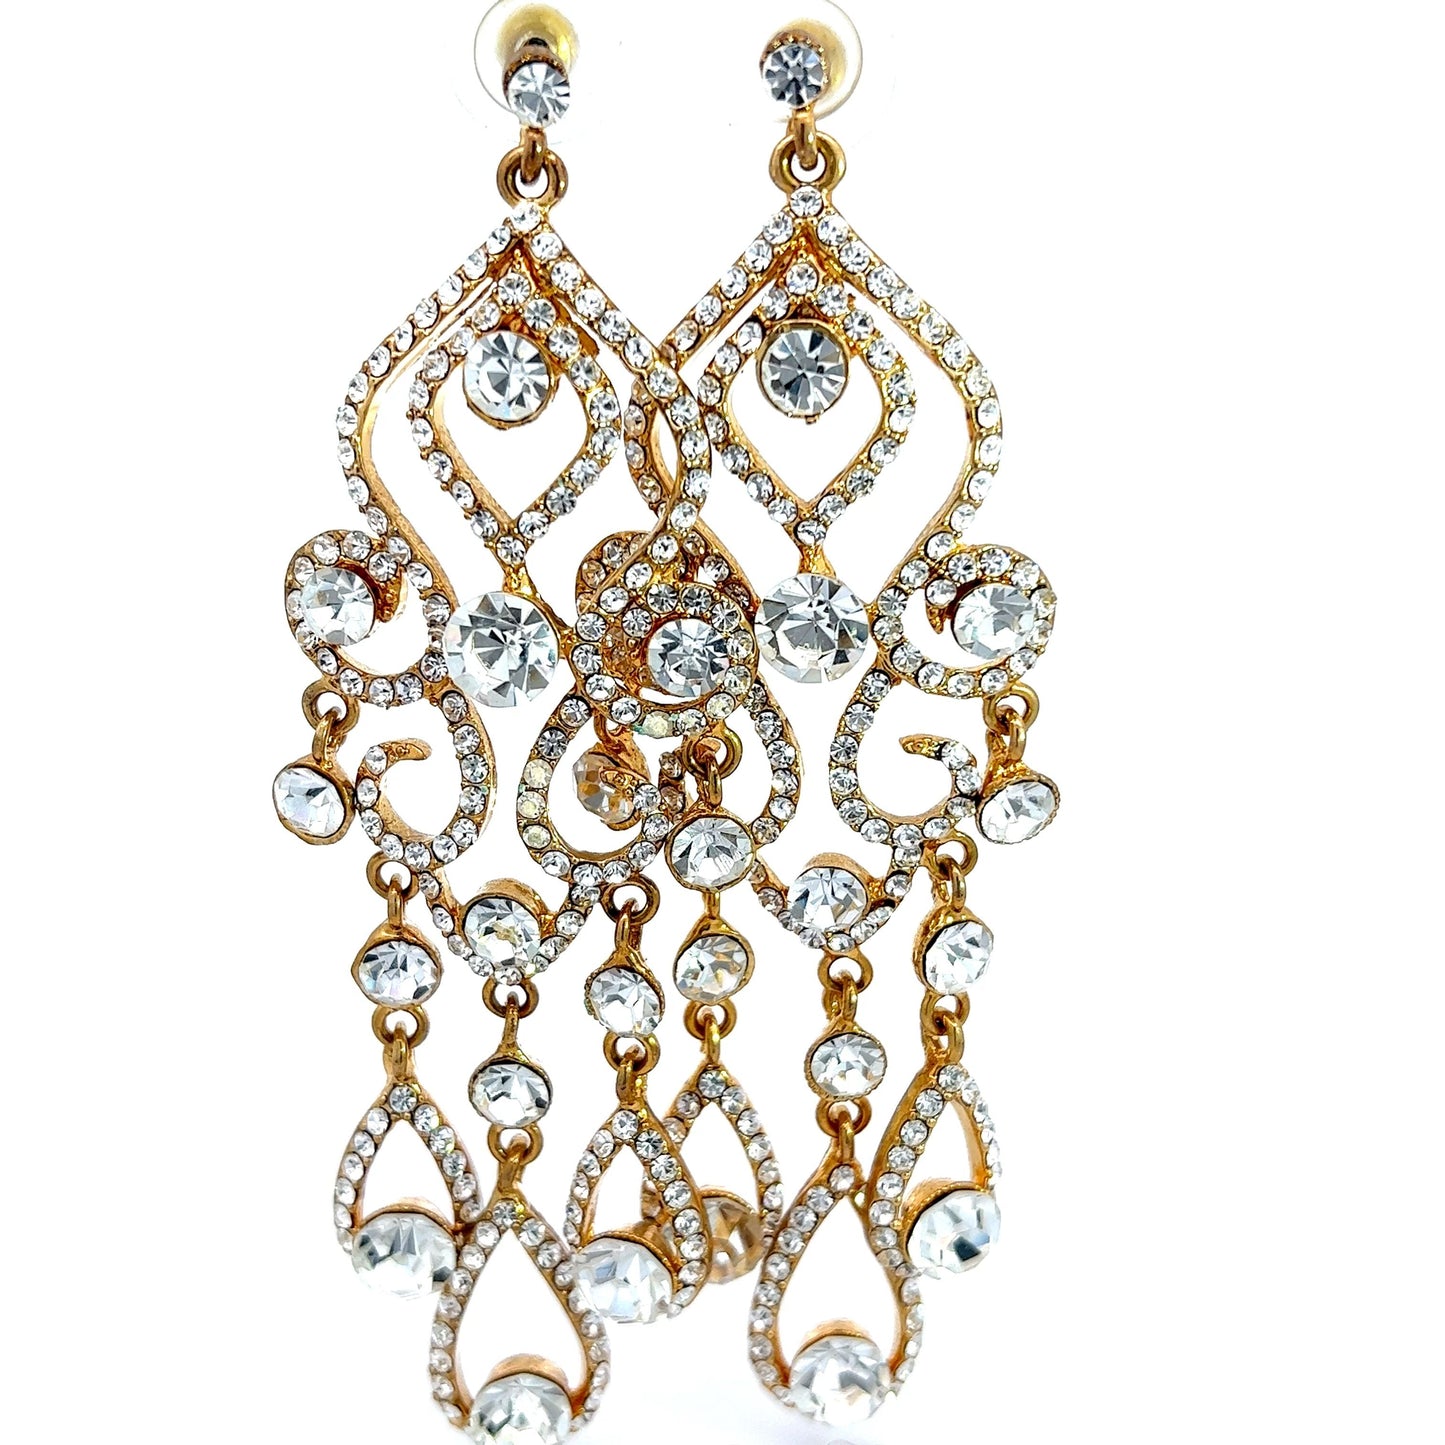 Gold and Clear Crystal Chandelier Statement Earrings - Born To Glam